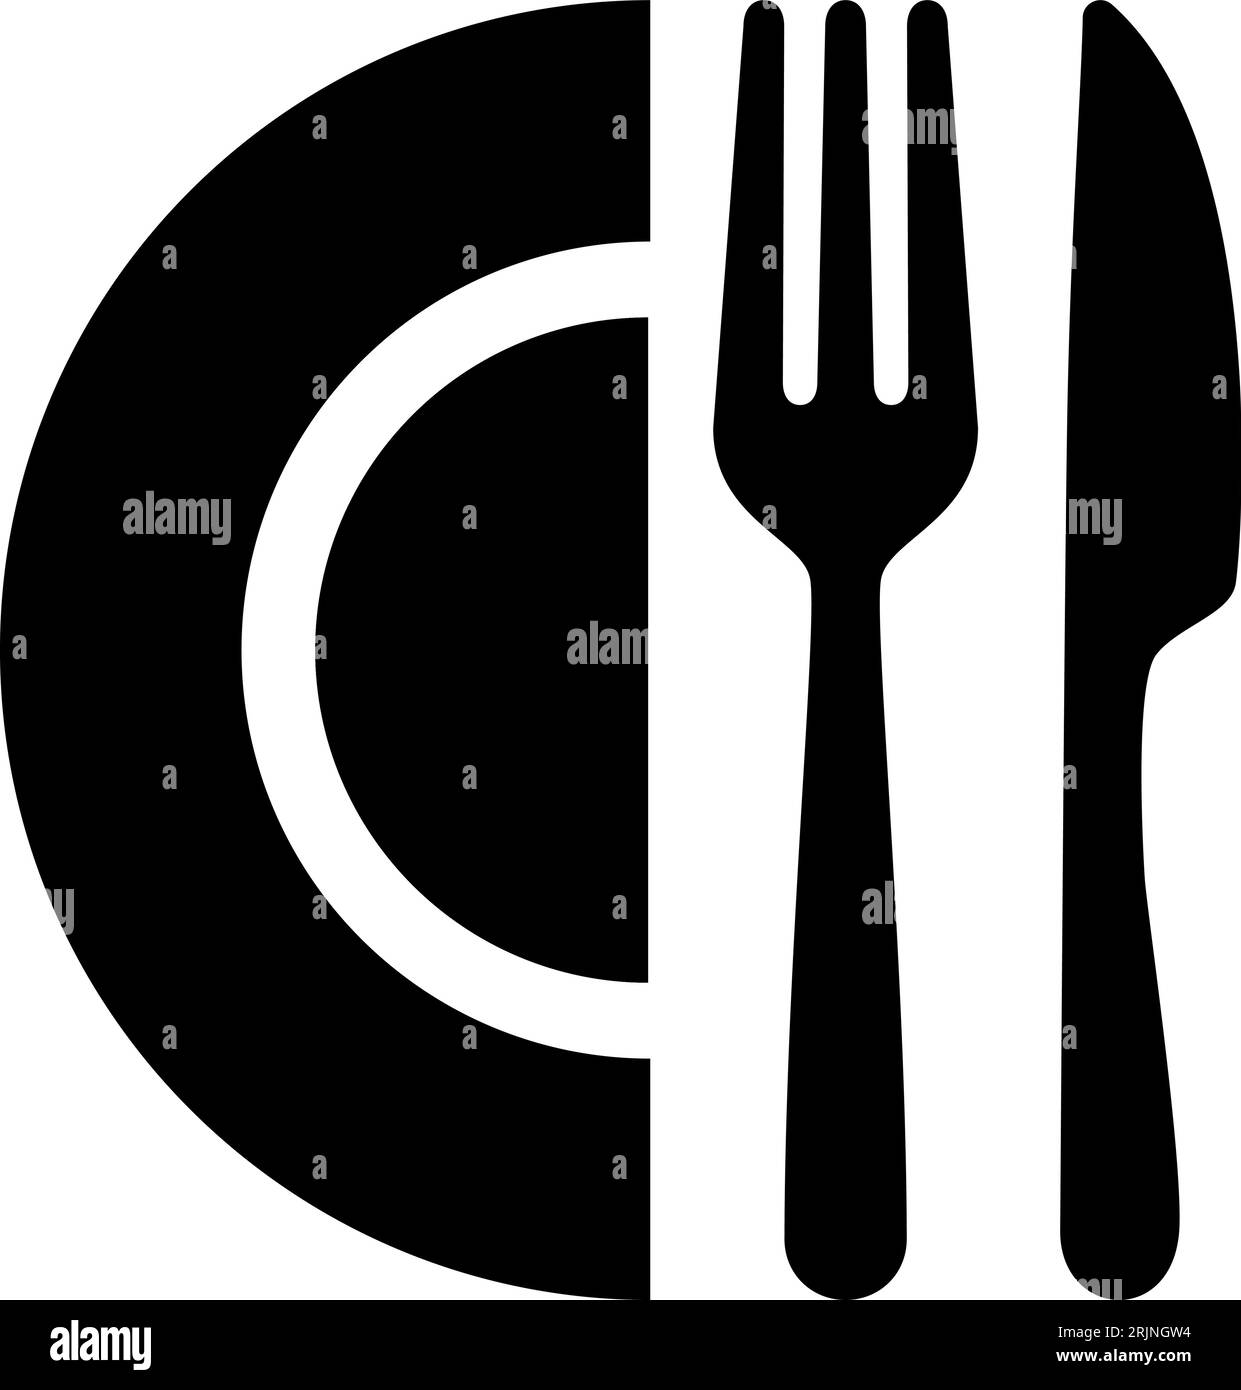 Cutlery flat icon as concept of restaurant or cafe symbol for business lunch Stock Vector